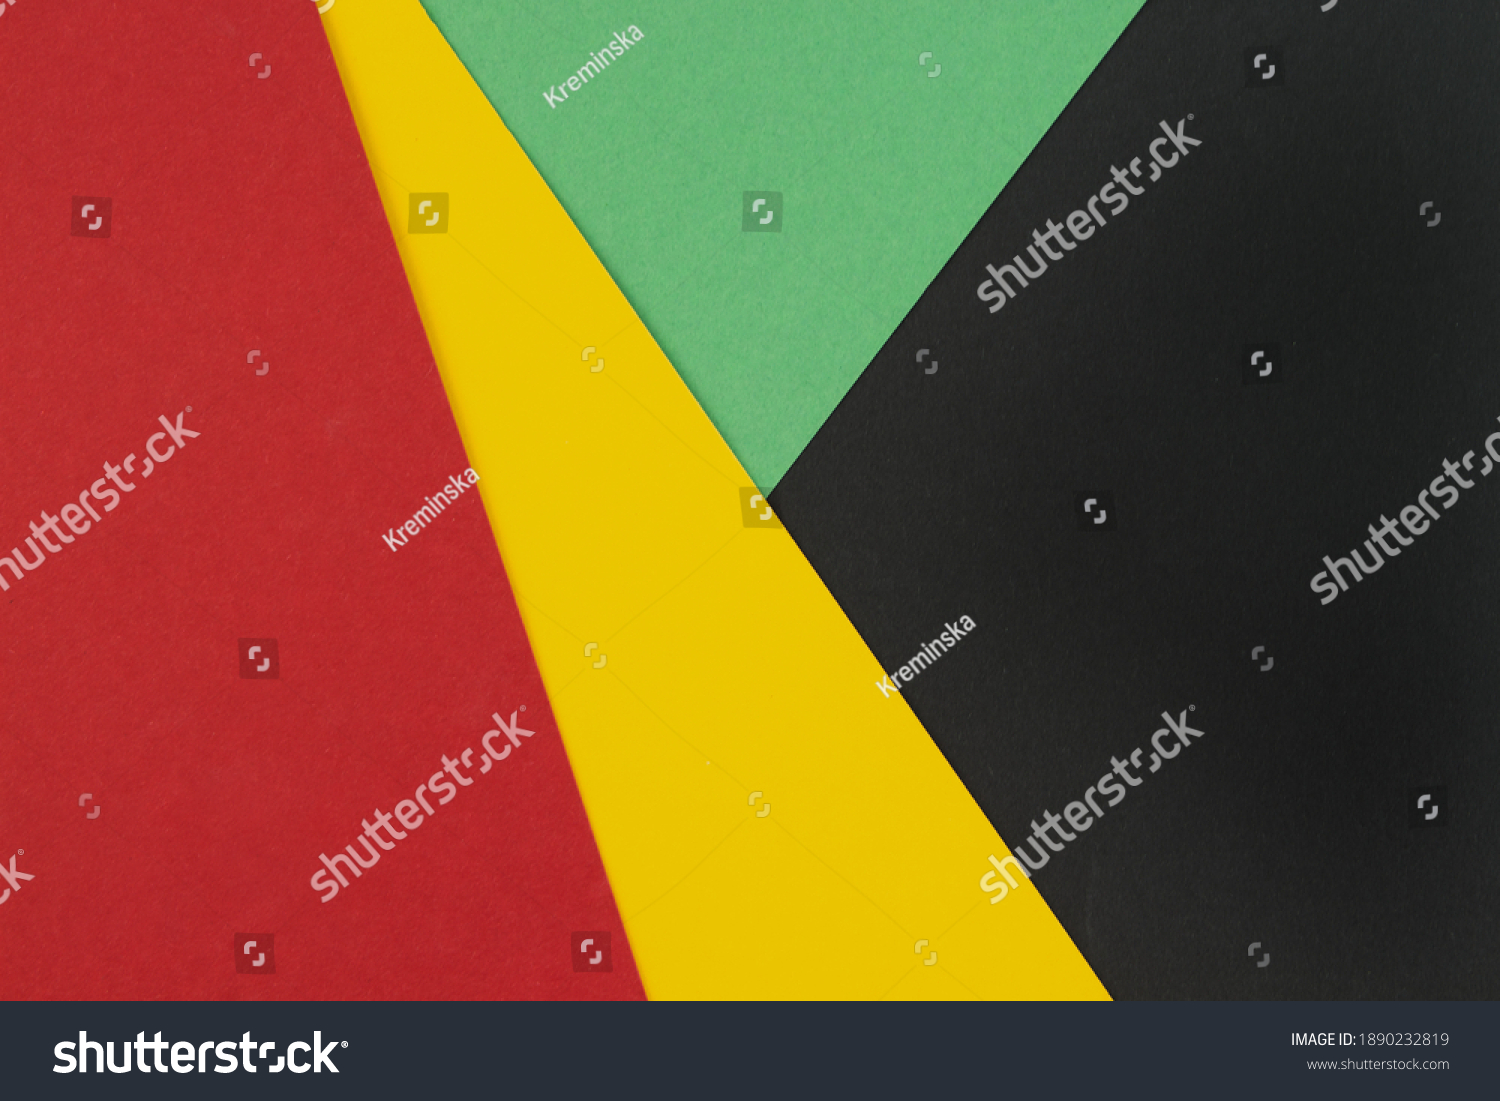 February Black History Month. Abstract Paper geometric black, red, yellow, green background. Copy space, place for your text. Top view. #1890232819